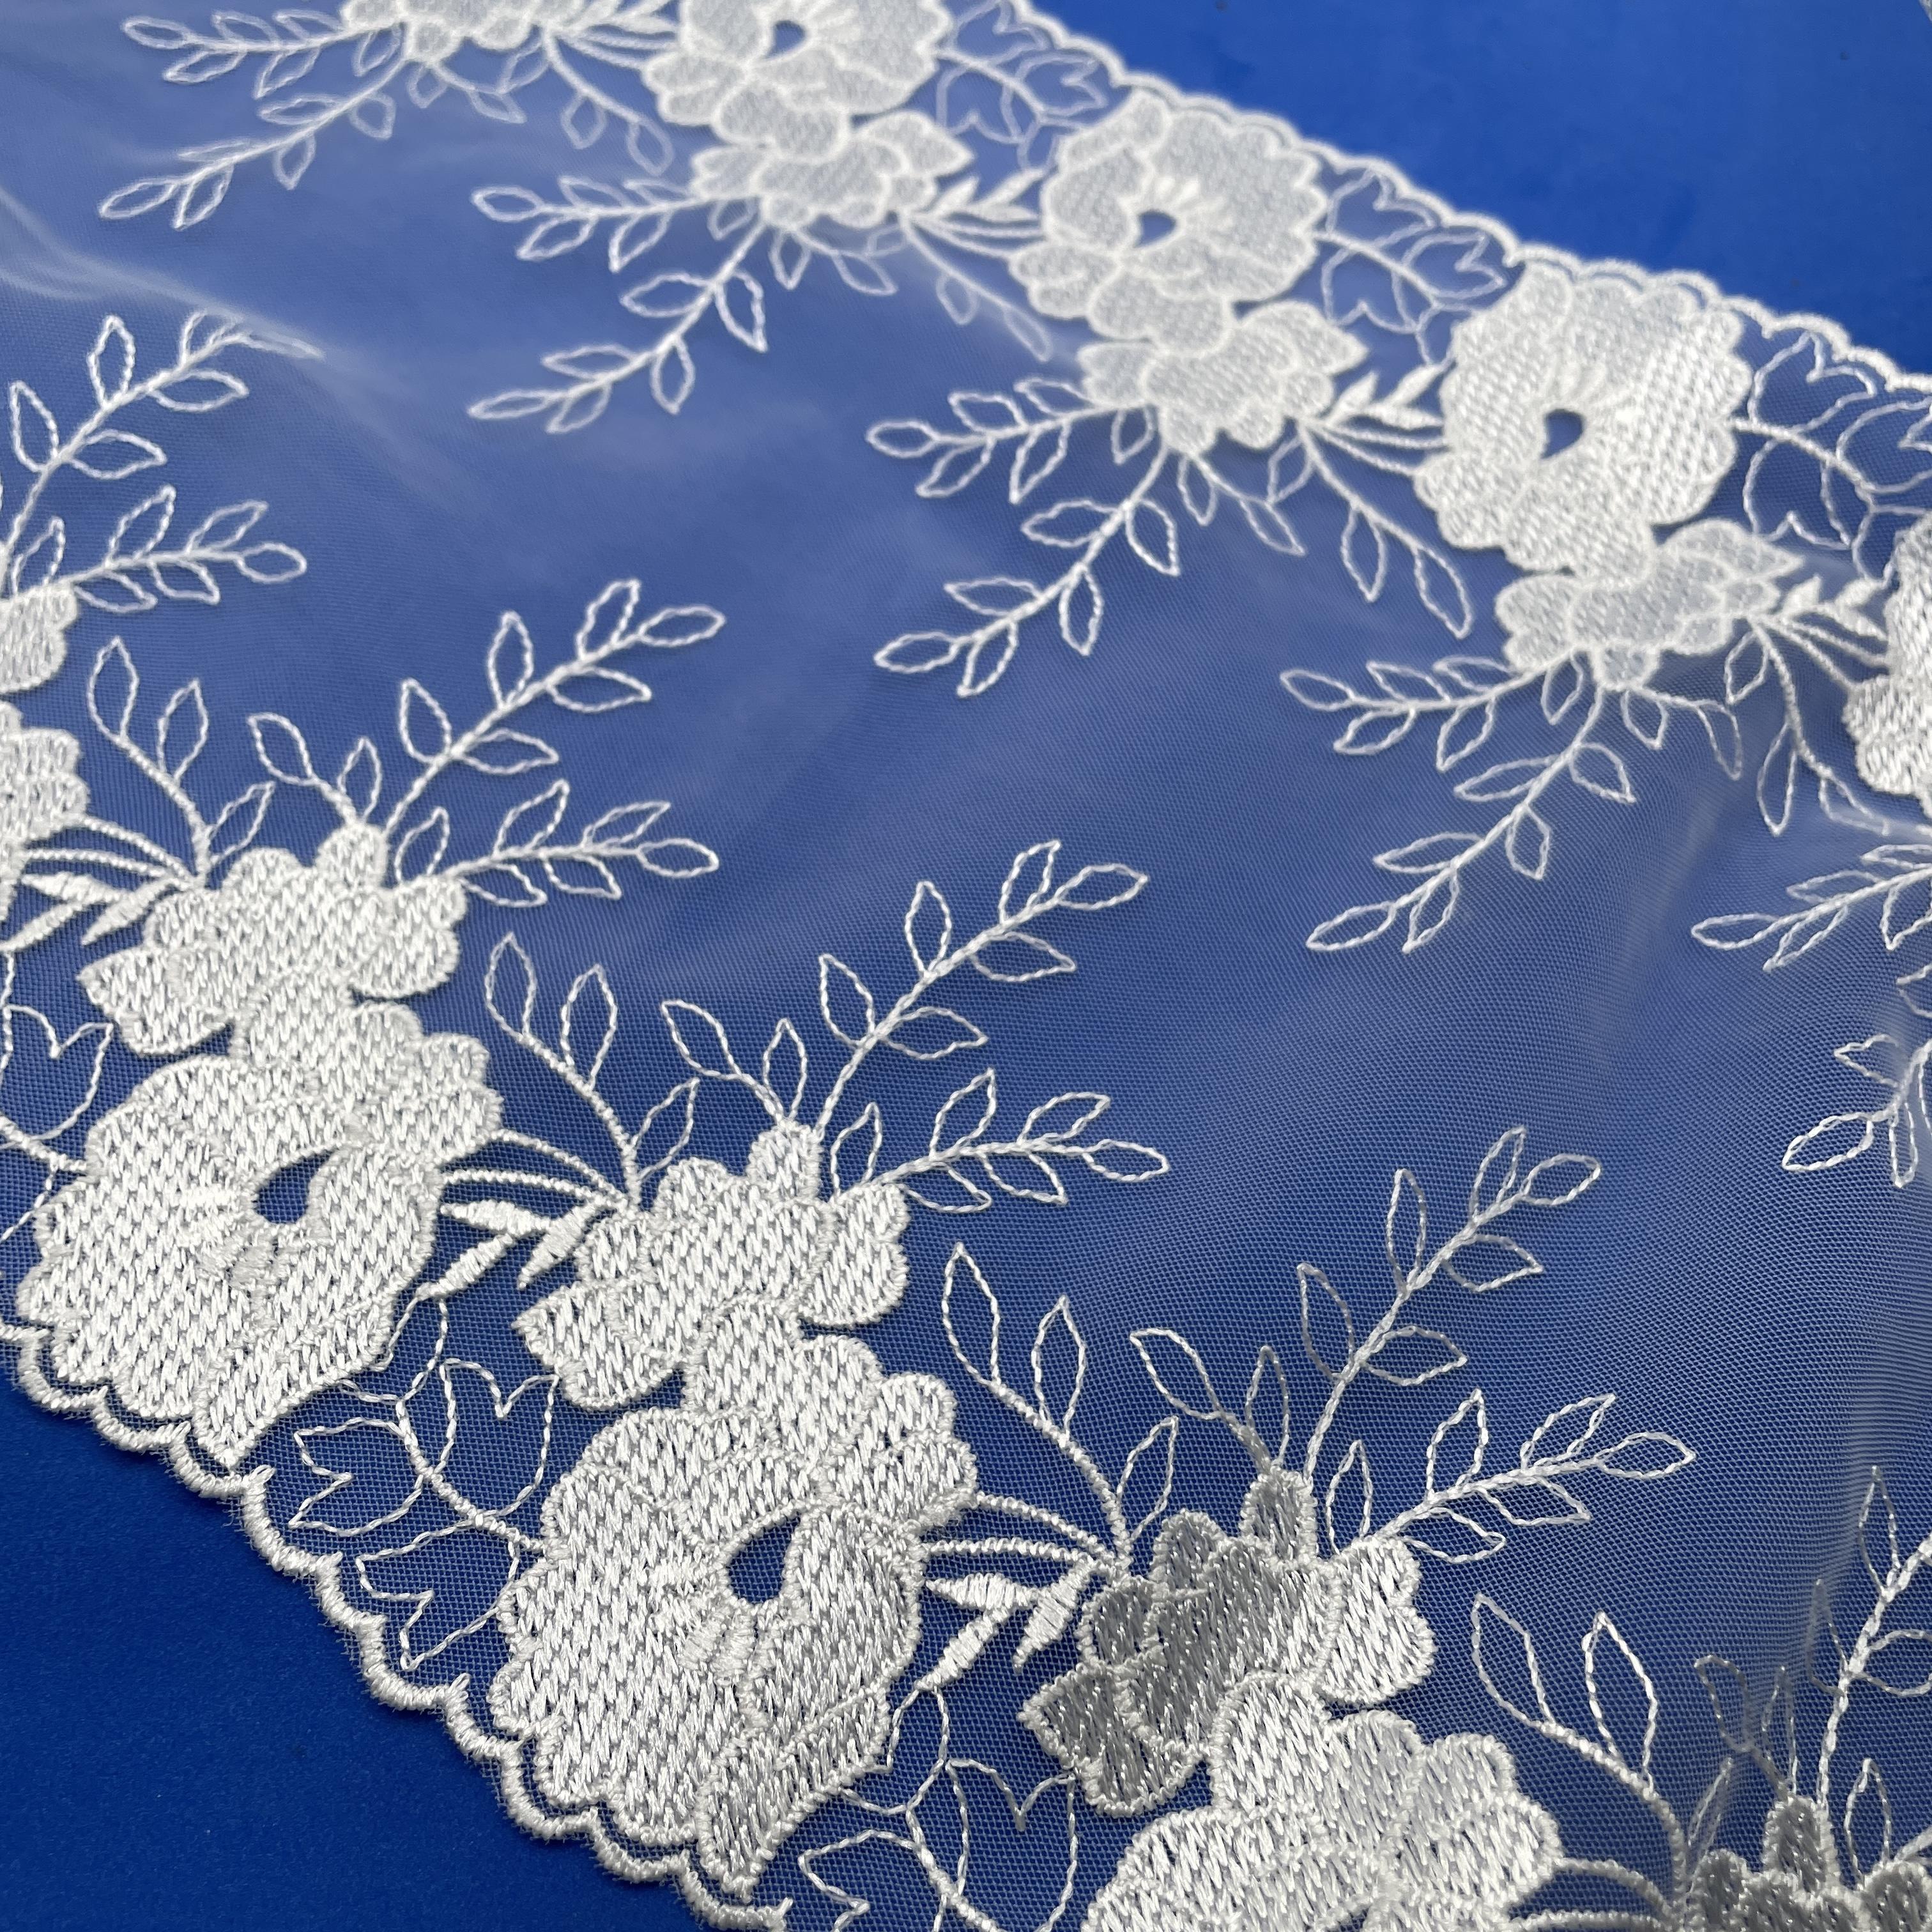 Cotton Tulle Galloon Lace